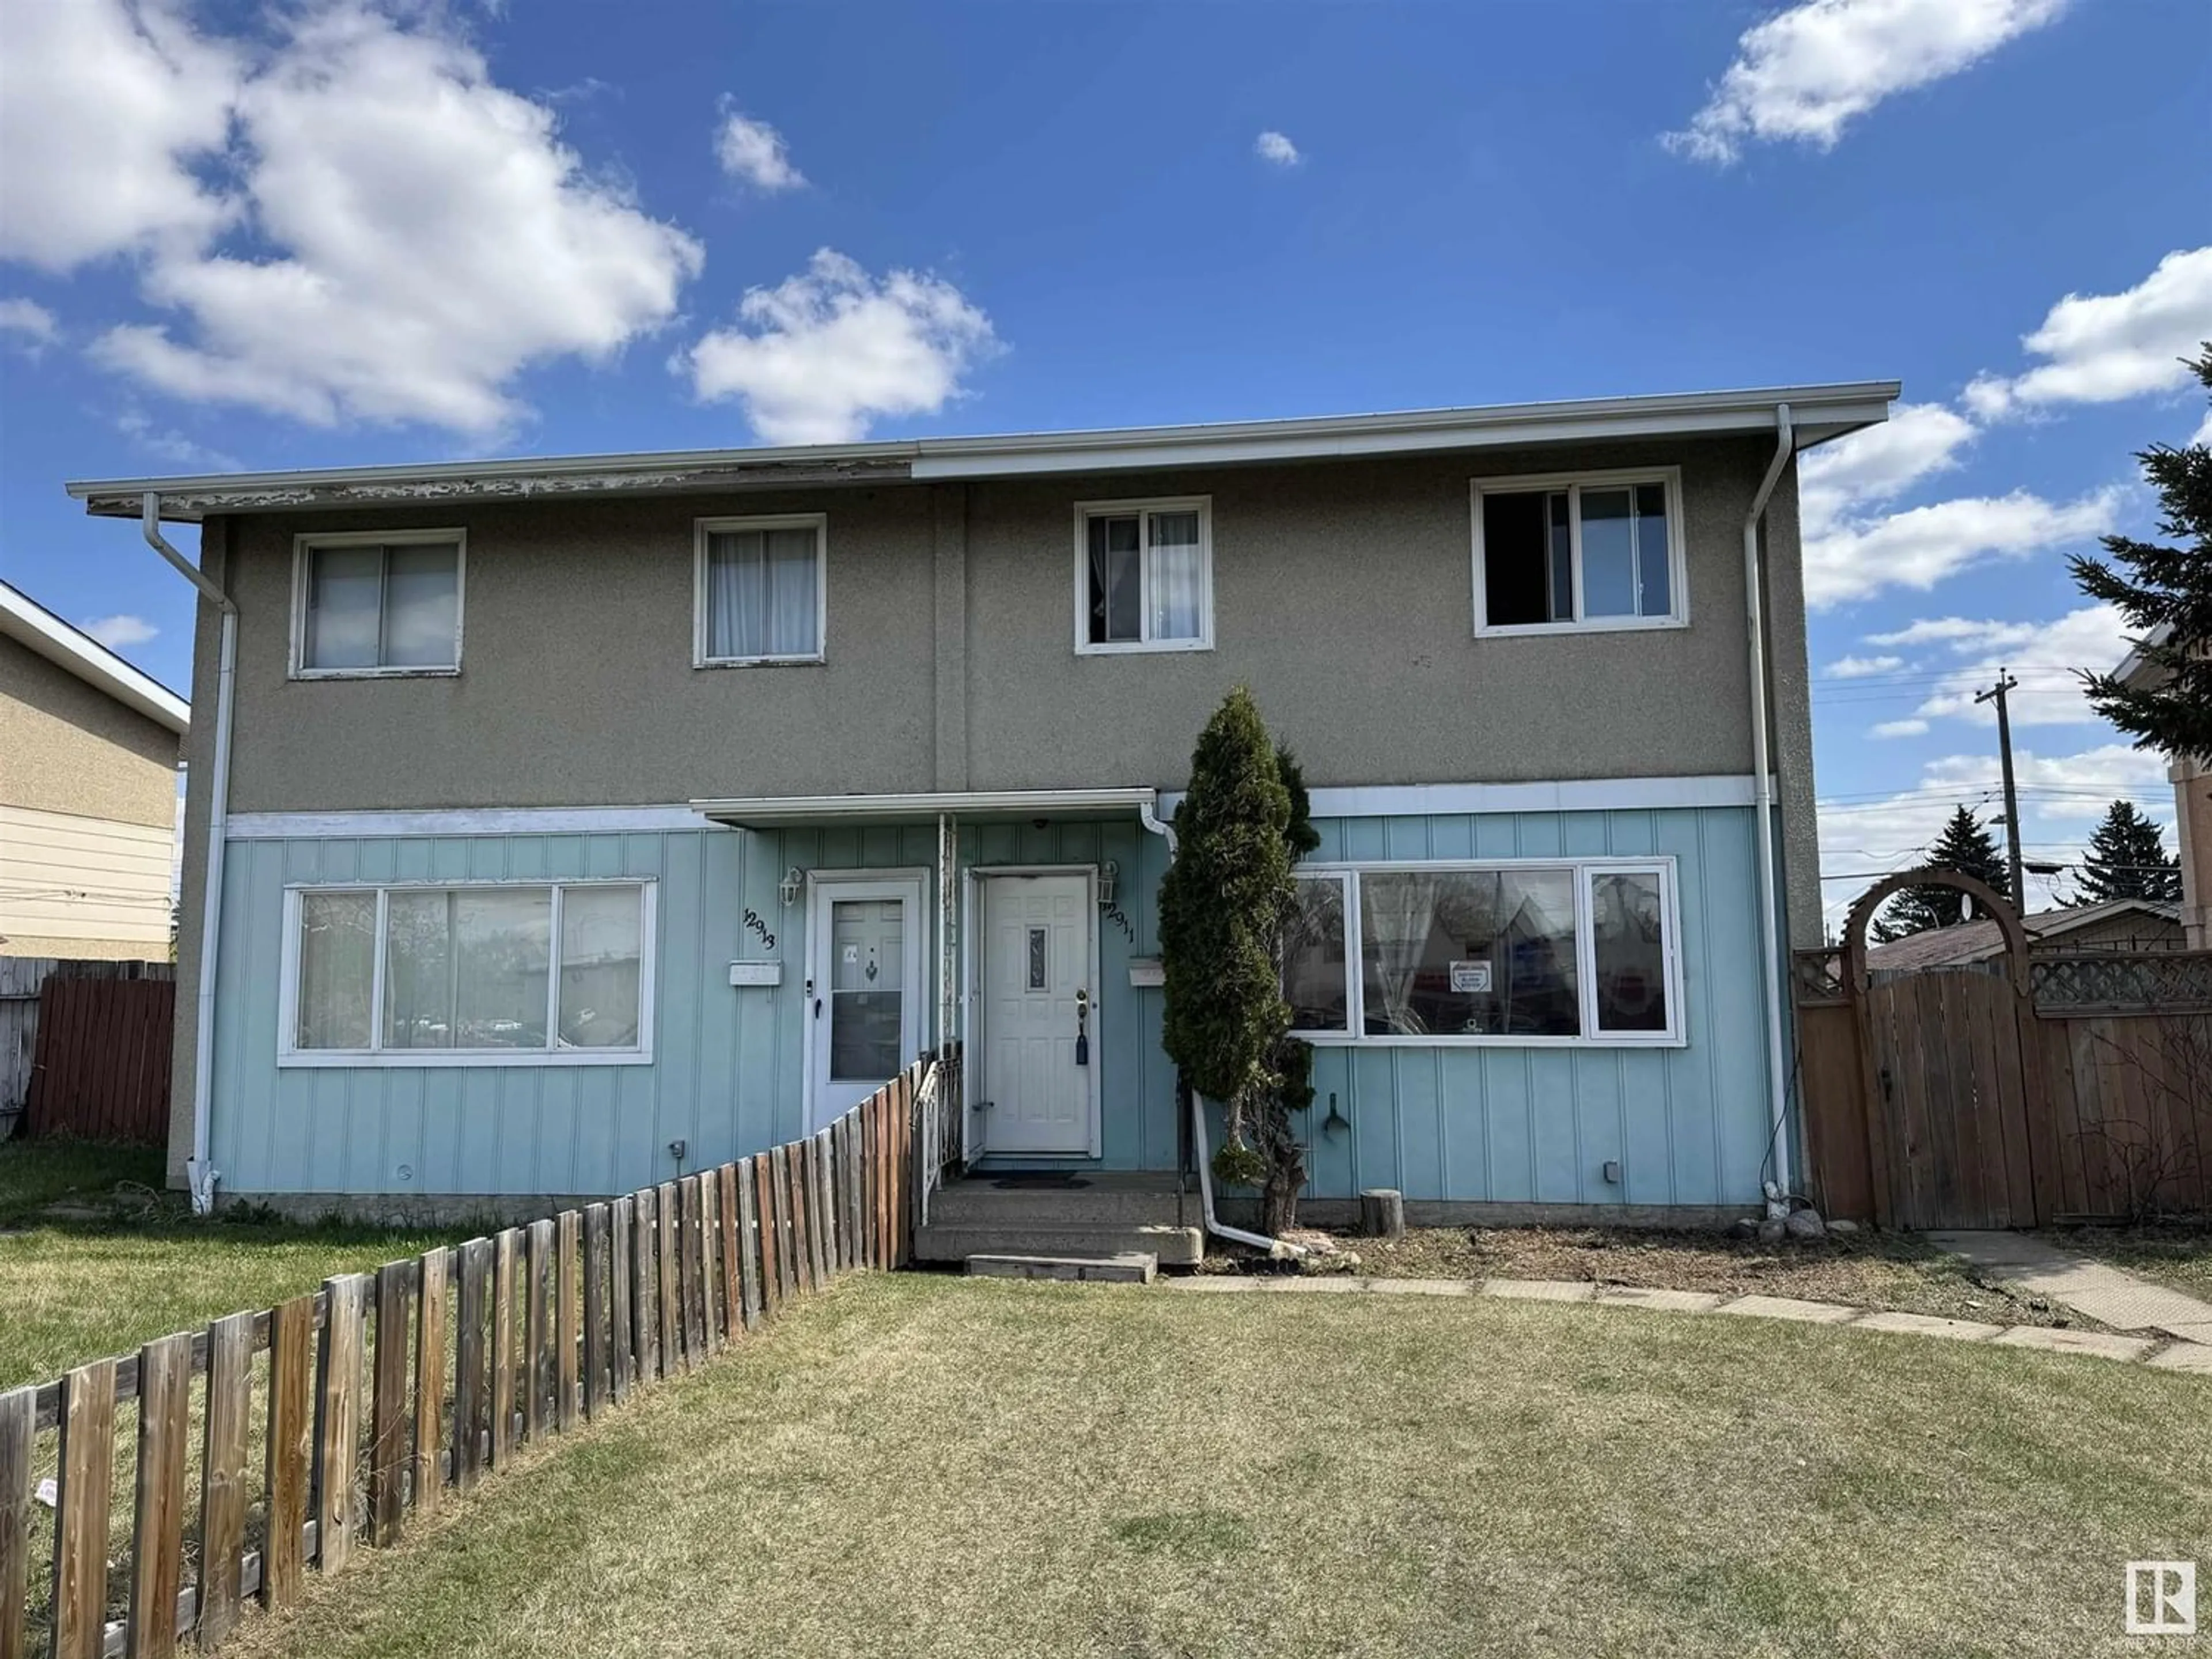 A pic from exterior of the house or condo for 12911 82 ST NW, Edmonton Alberta T5E2T3